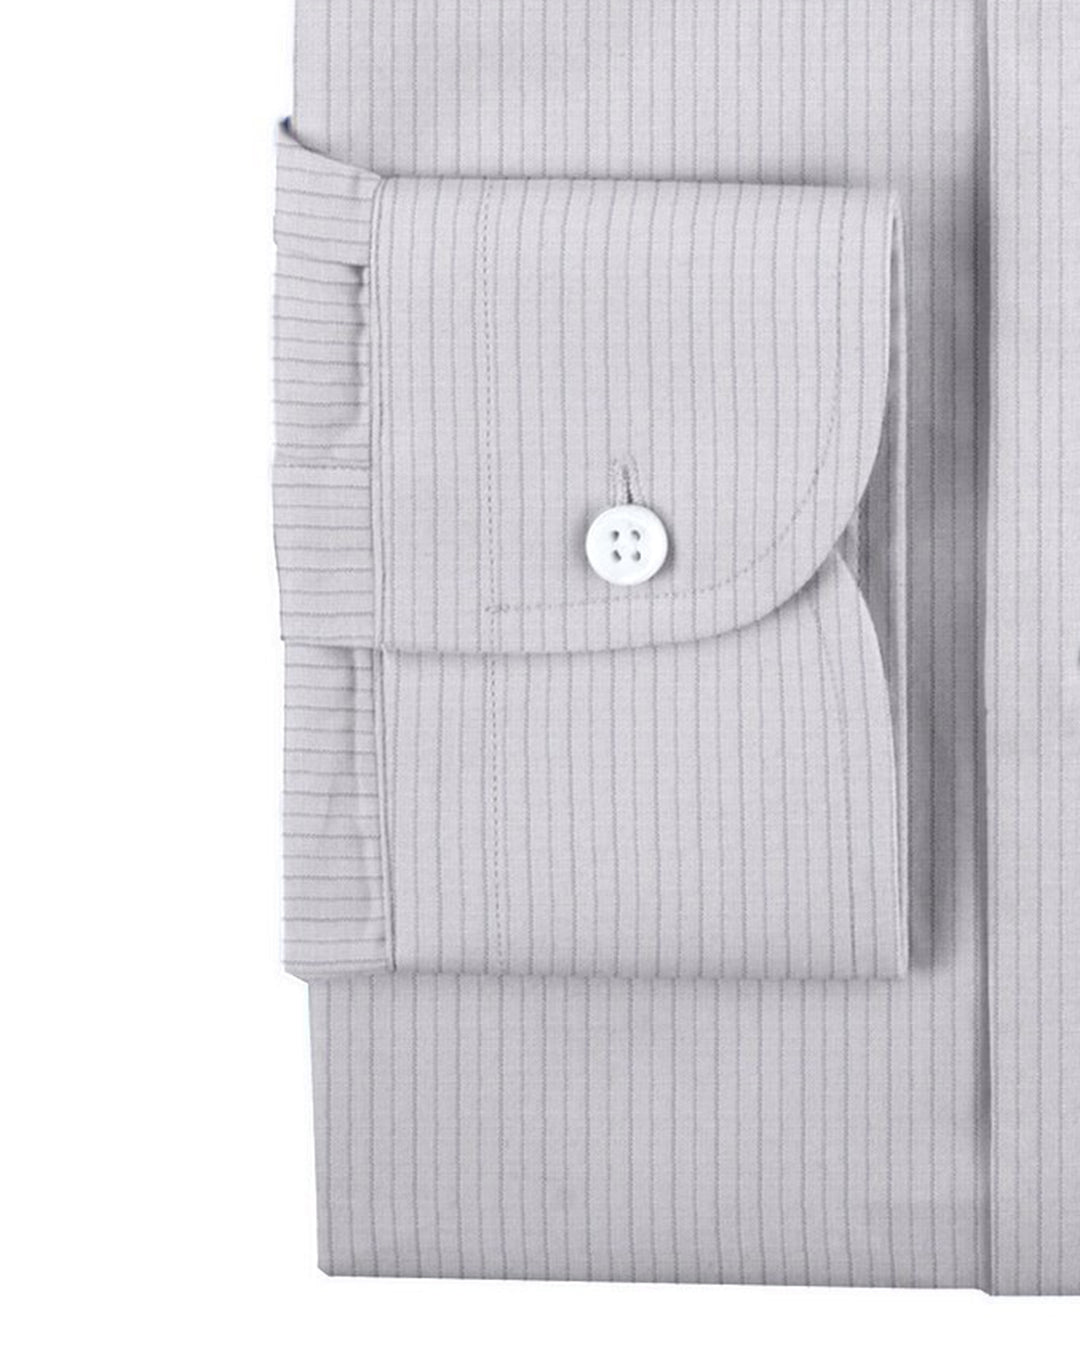 Cuff of the custom linen shirt for men in grey pinstripes by Luxire Clothing